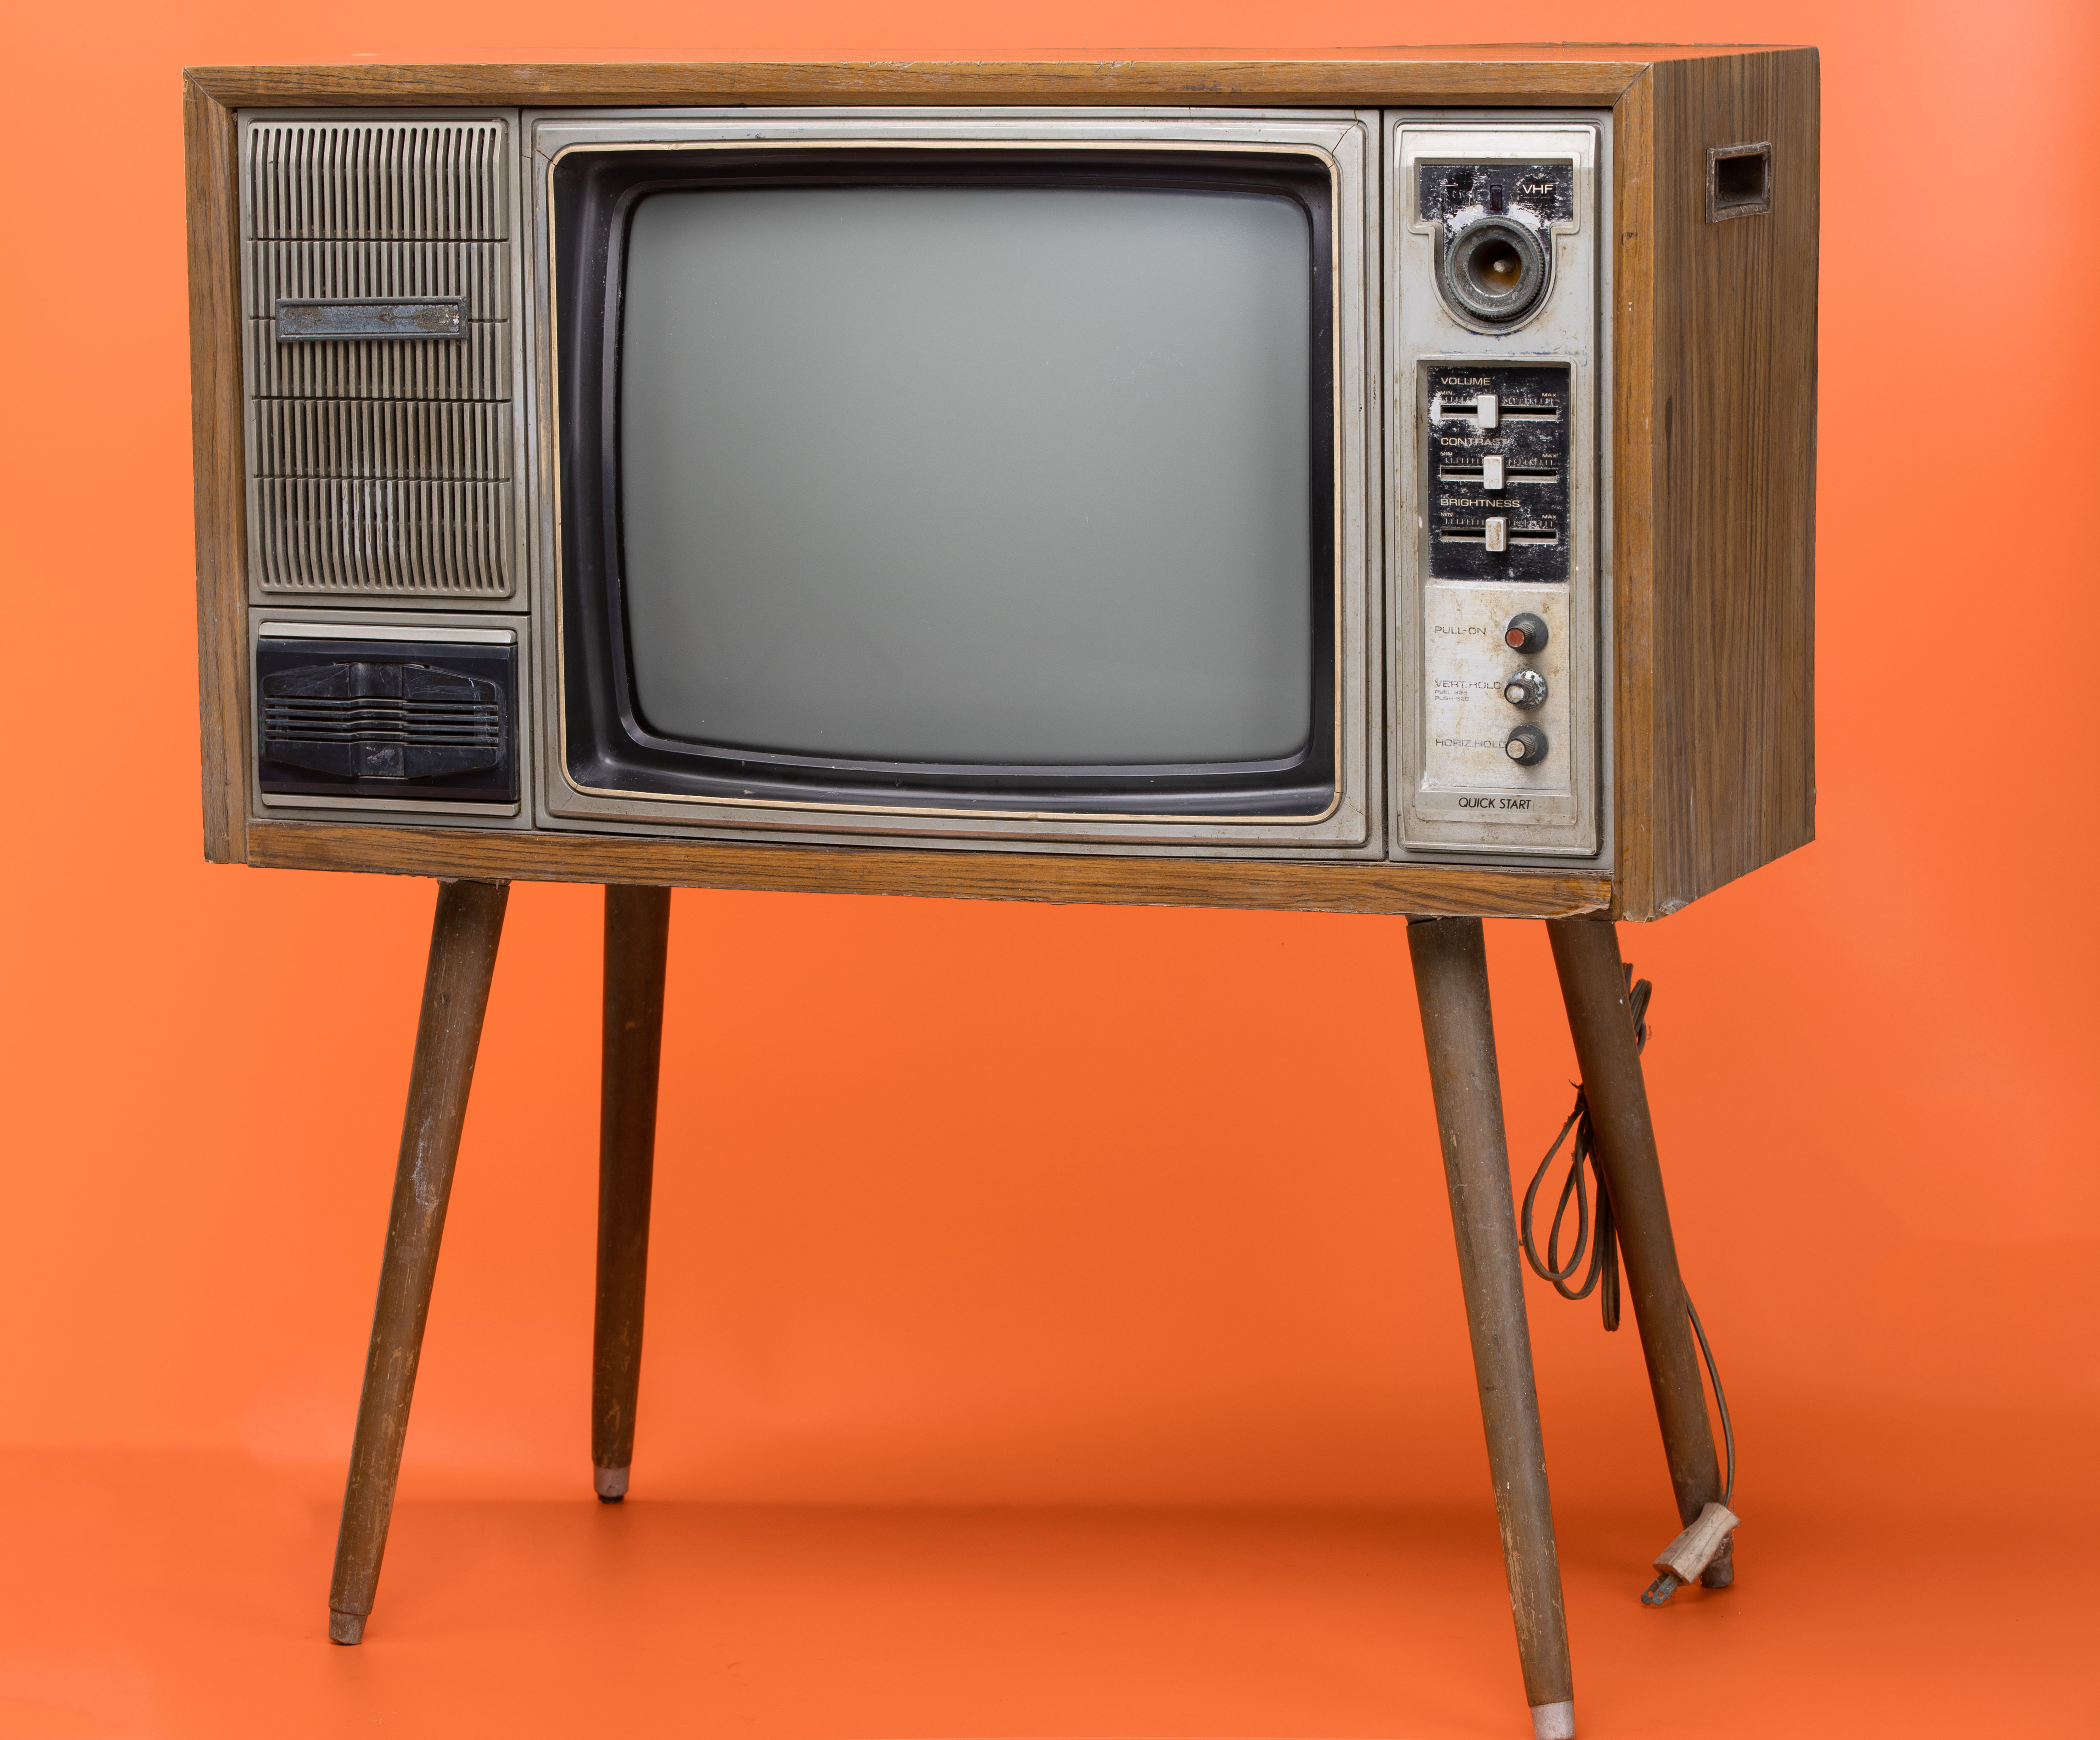 Televisions in homes influenced public relations